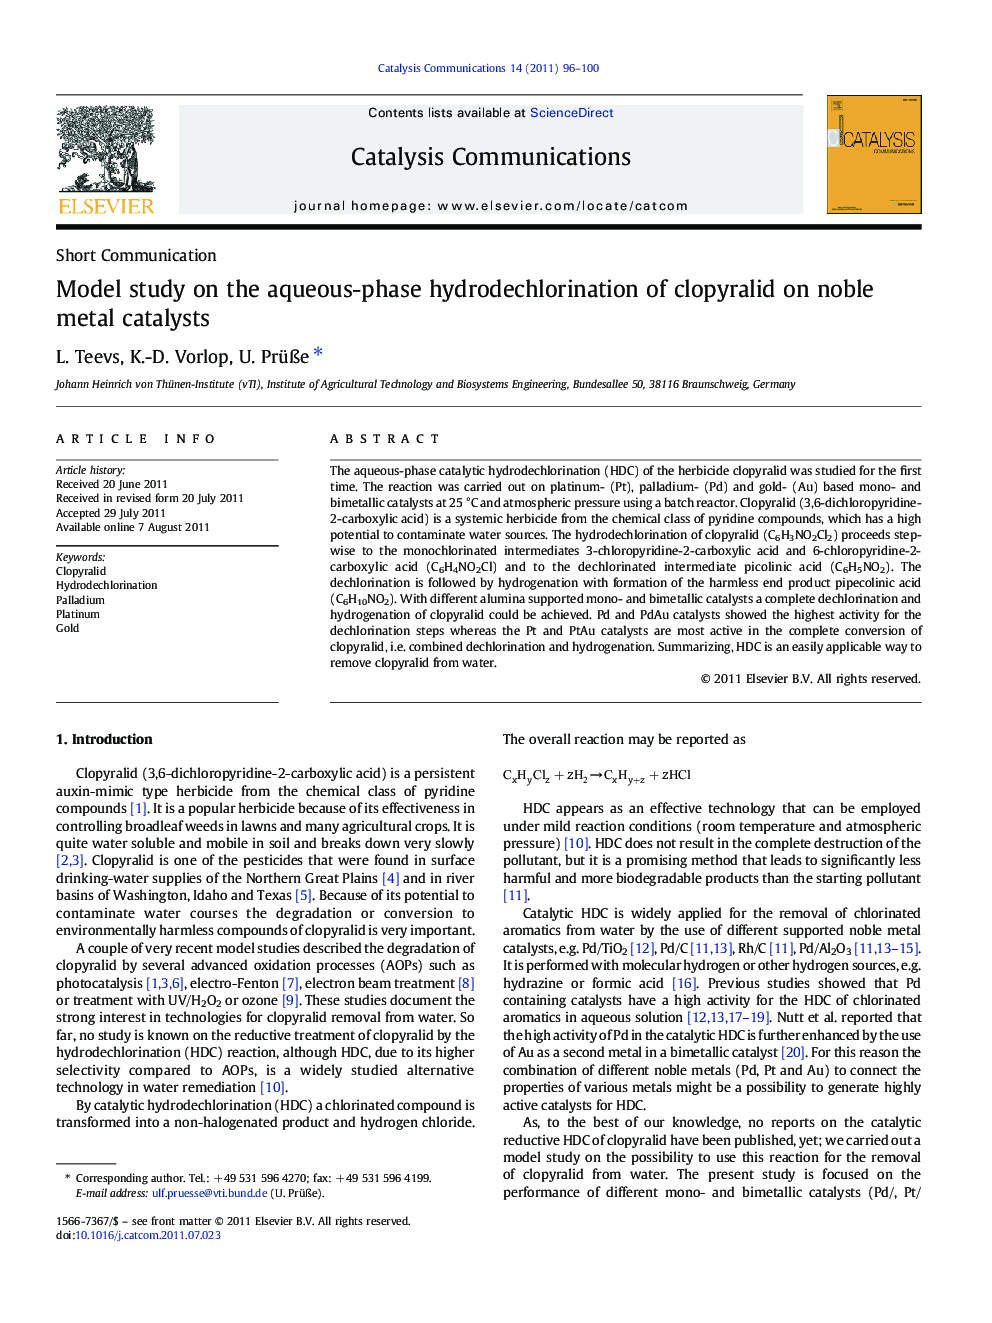 Model study on the aqueous-phase hydrodechlorination of clopyralid on noble metal catalysts